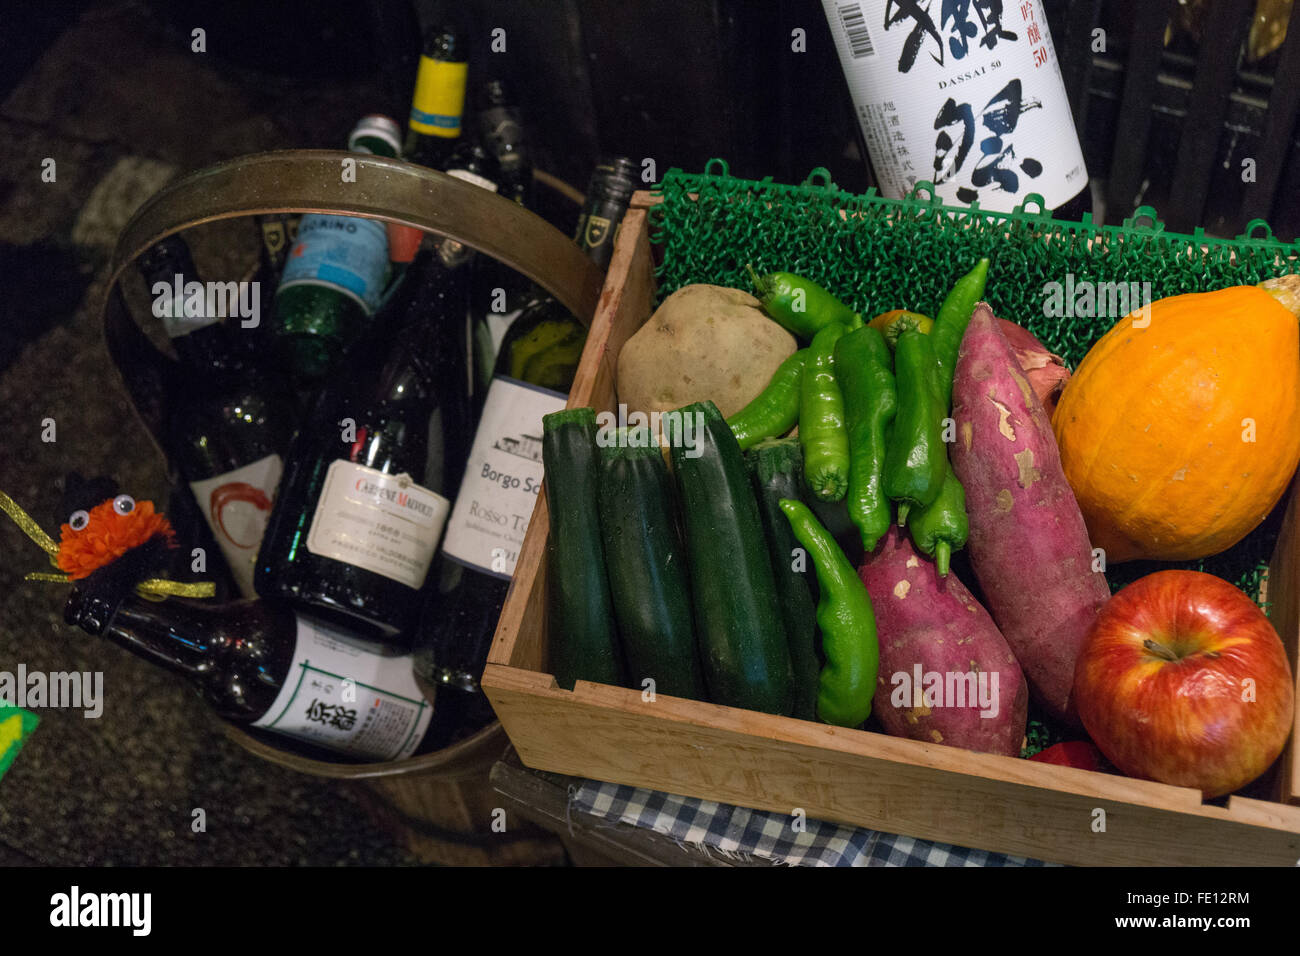 vegetables and wine display at a restaurant in Kyoto Japan Stock Photo